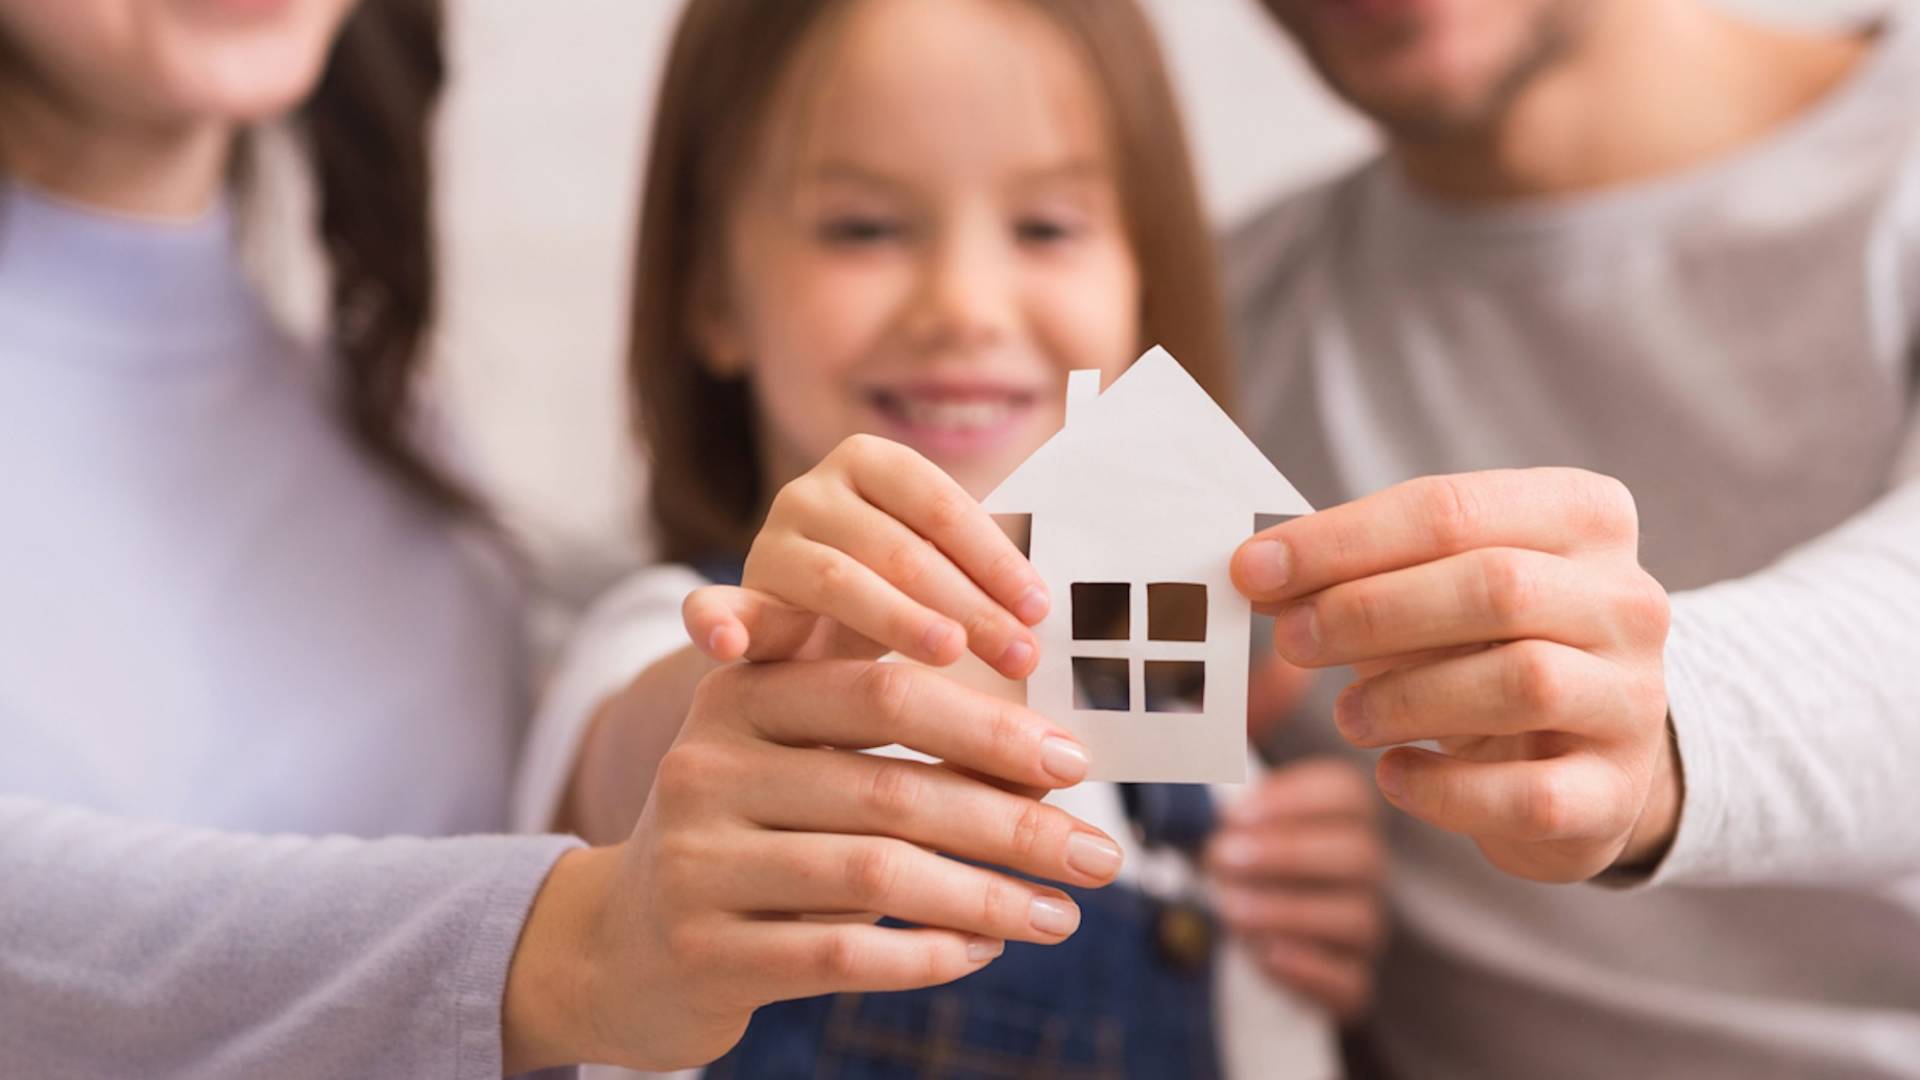 Family holding a paper cut-out of a small house.